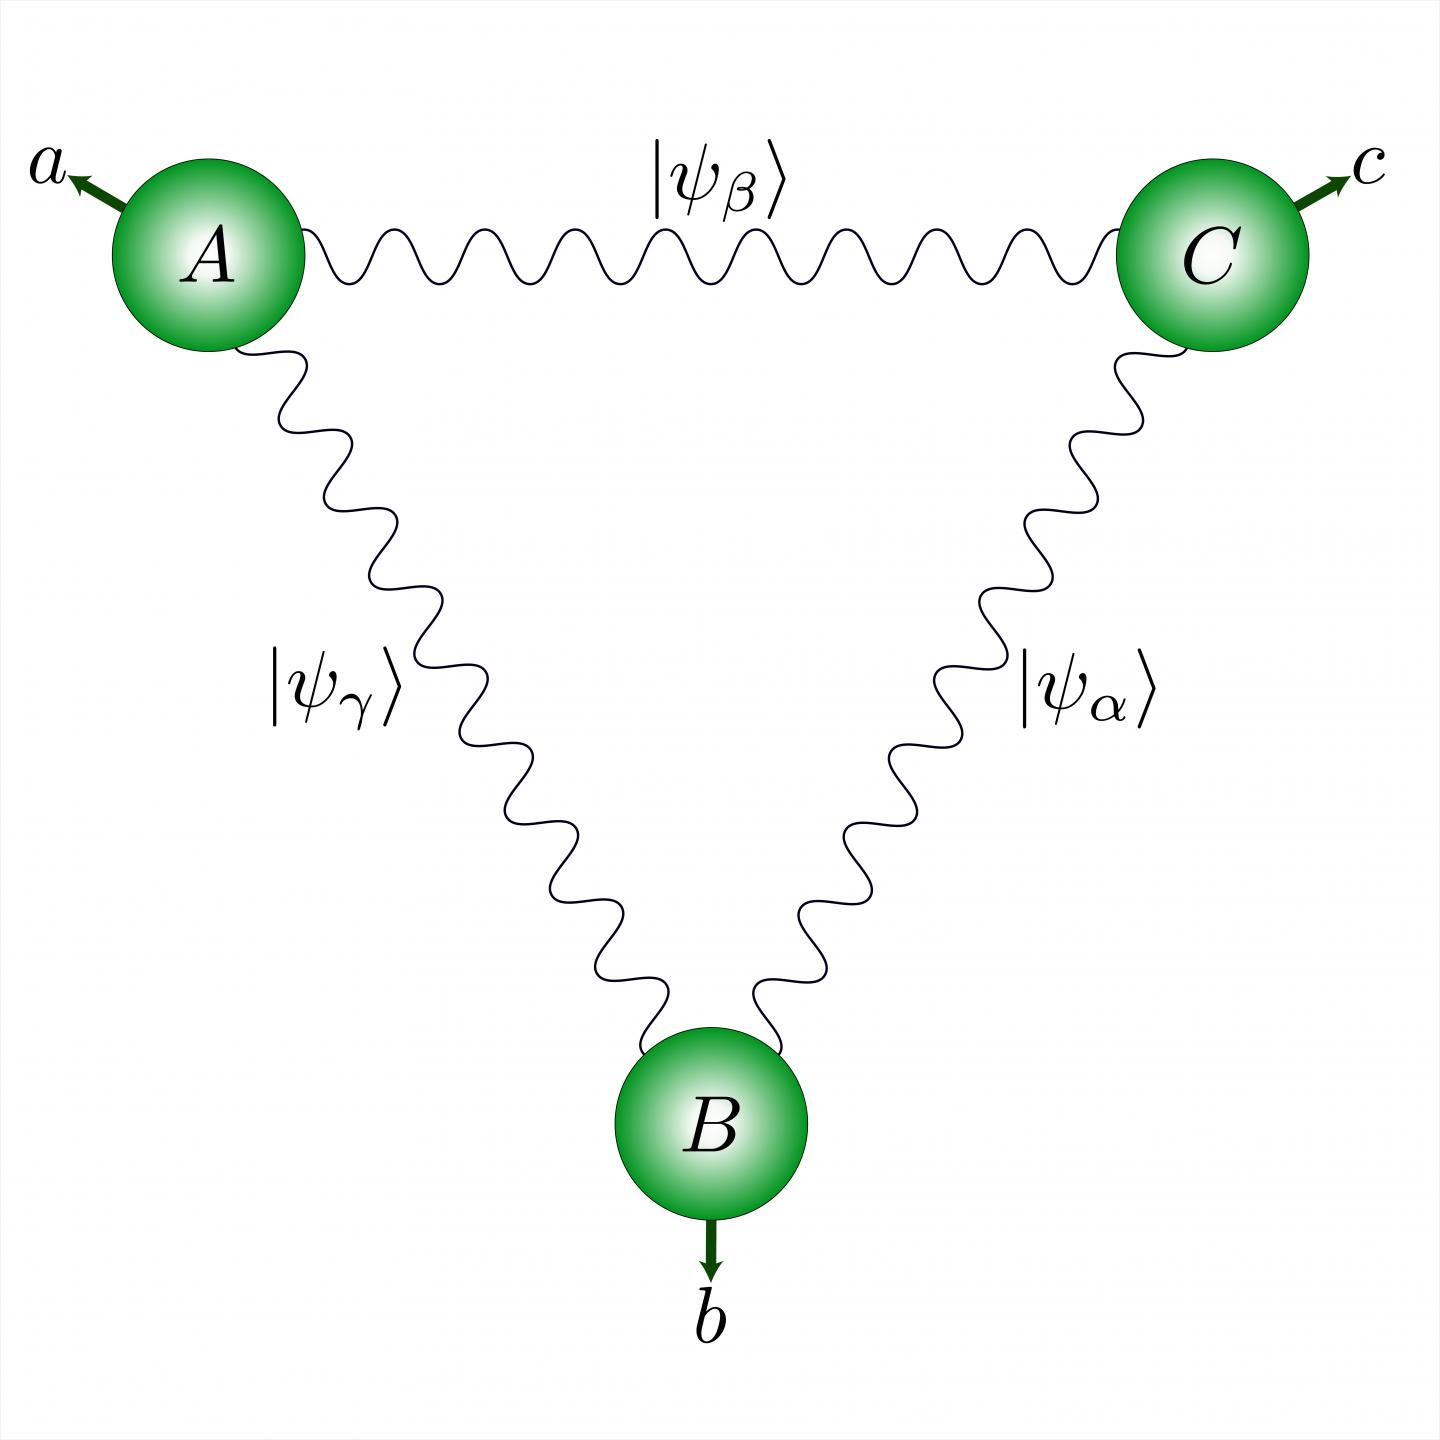 A Quantum Network with a Triangular Structure